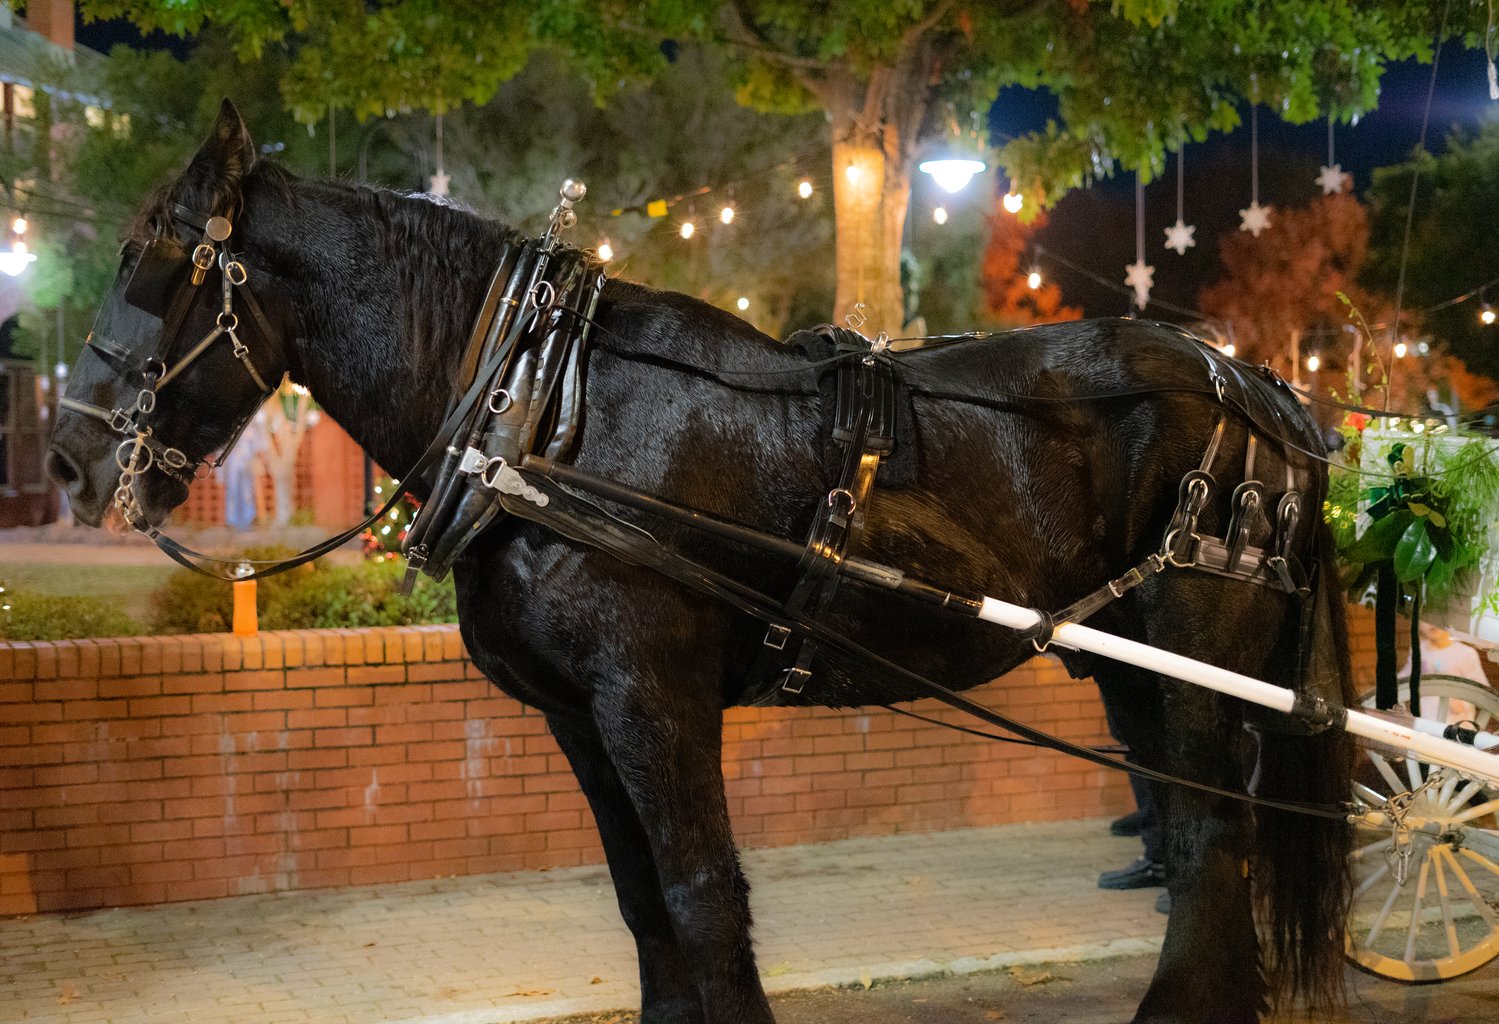 The 23rd annual A Dickens Holiday & Carriage Rides, hosted by the Downtown Alliance, was held on  Nov. 25 at the Fayetteville History Museum.